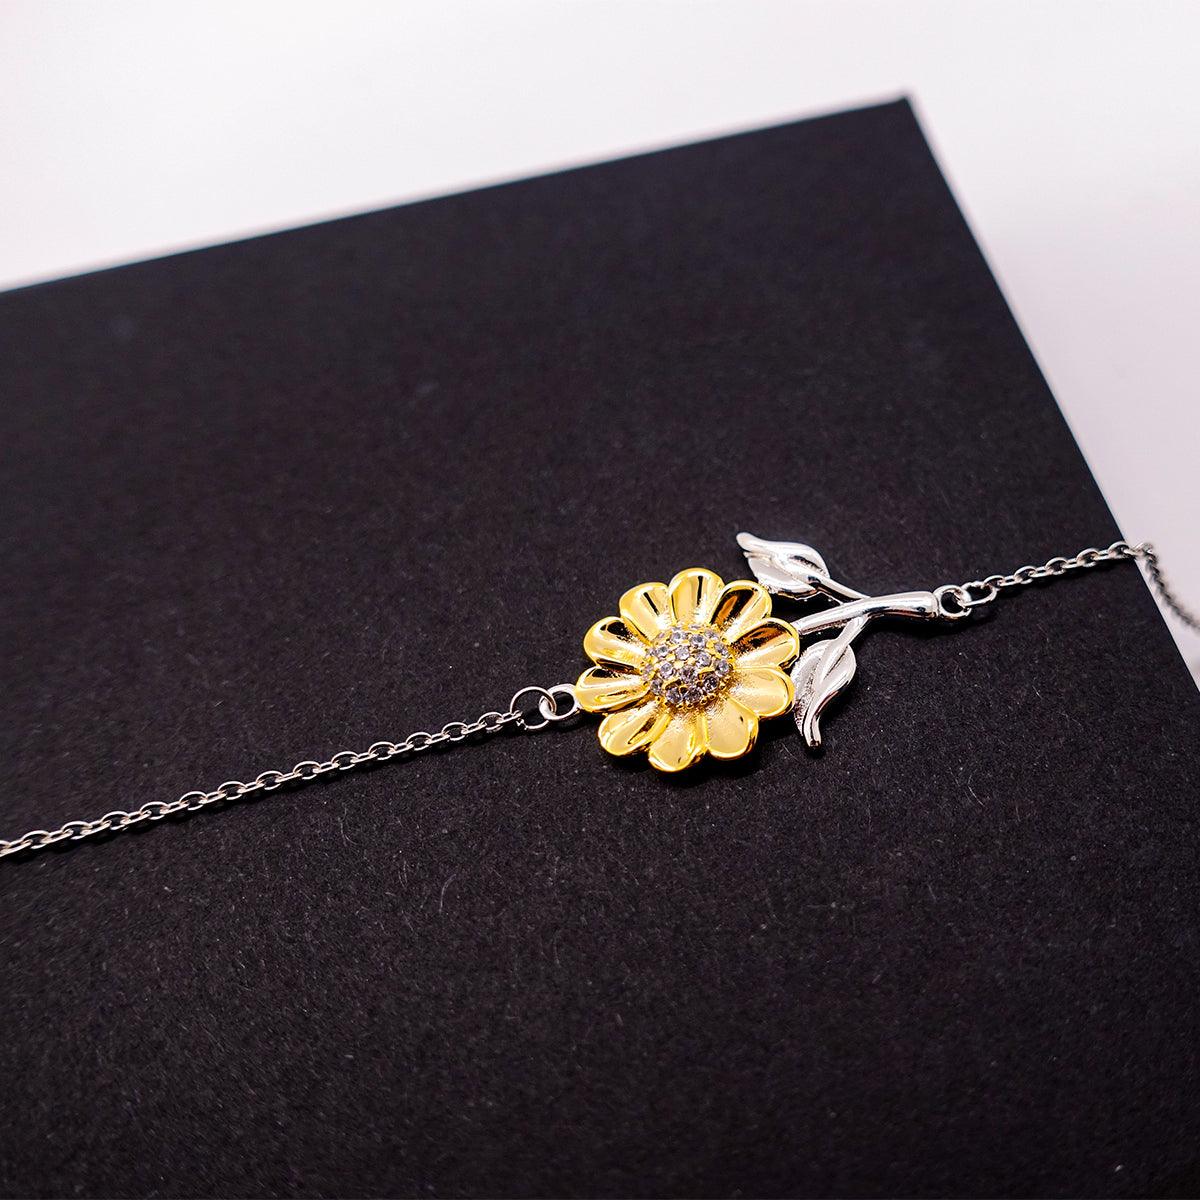 Remarkable Mixologist Gifts, Your dedication and hard work, Inspirational Birthday Christmas Unique Sunflower Bracelet For Mixologist, Coworkers, Men, Women, Friends - Mallard Moon Gift Shop